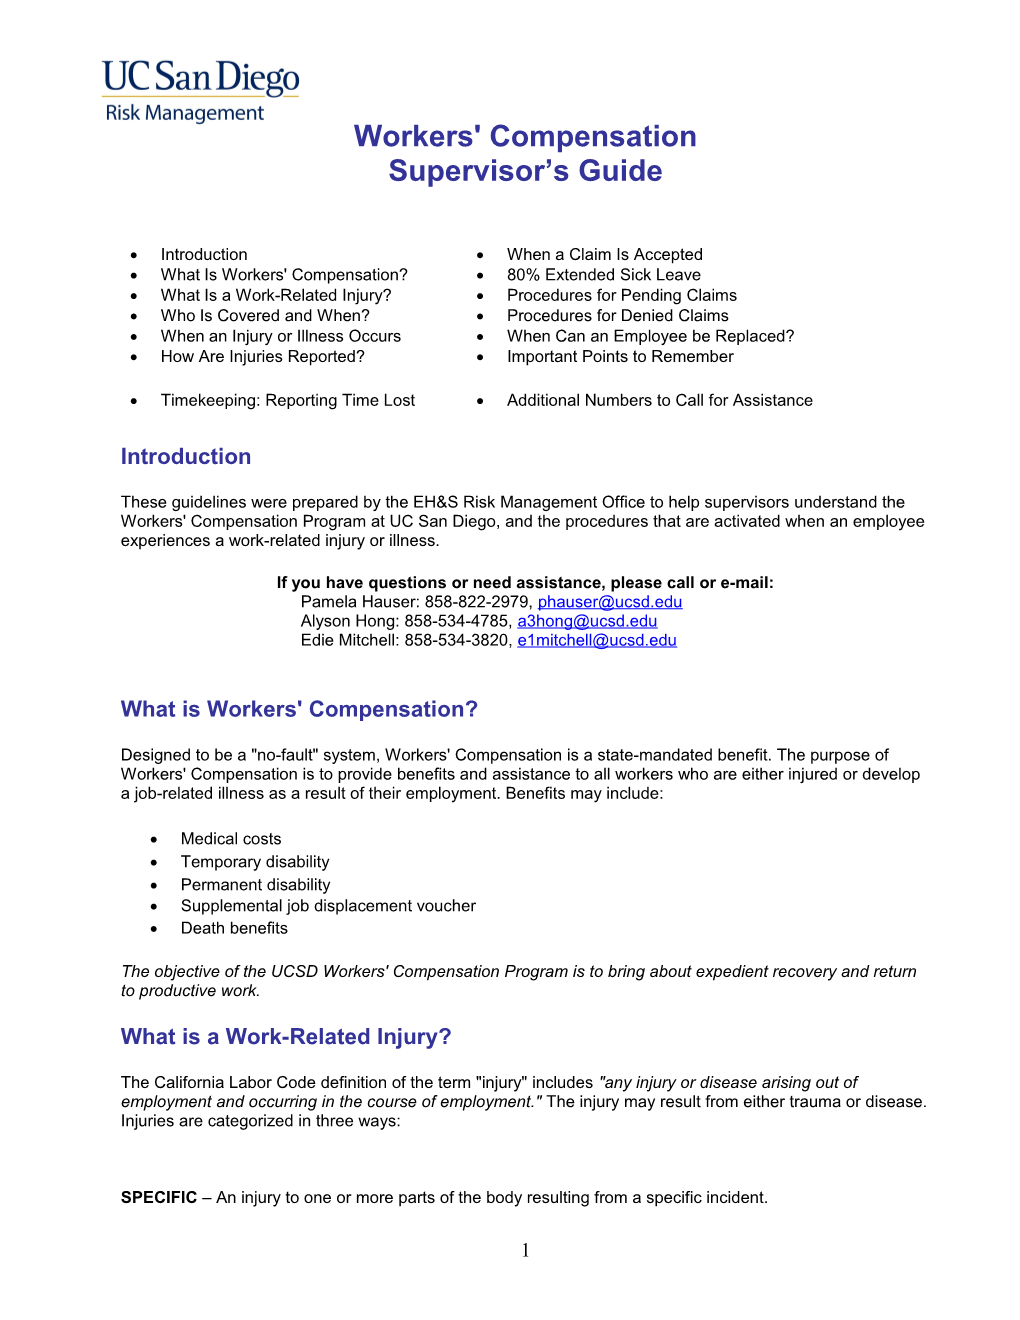 Workers' Compensation: Guidelines for Supervisors